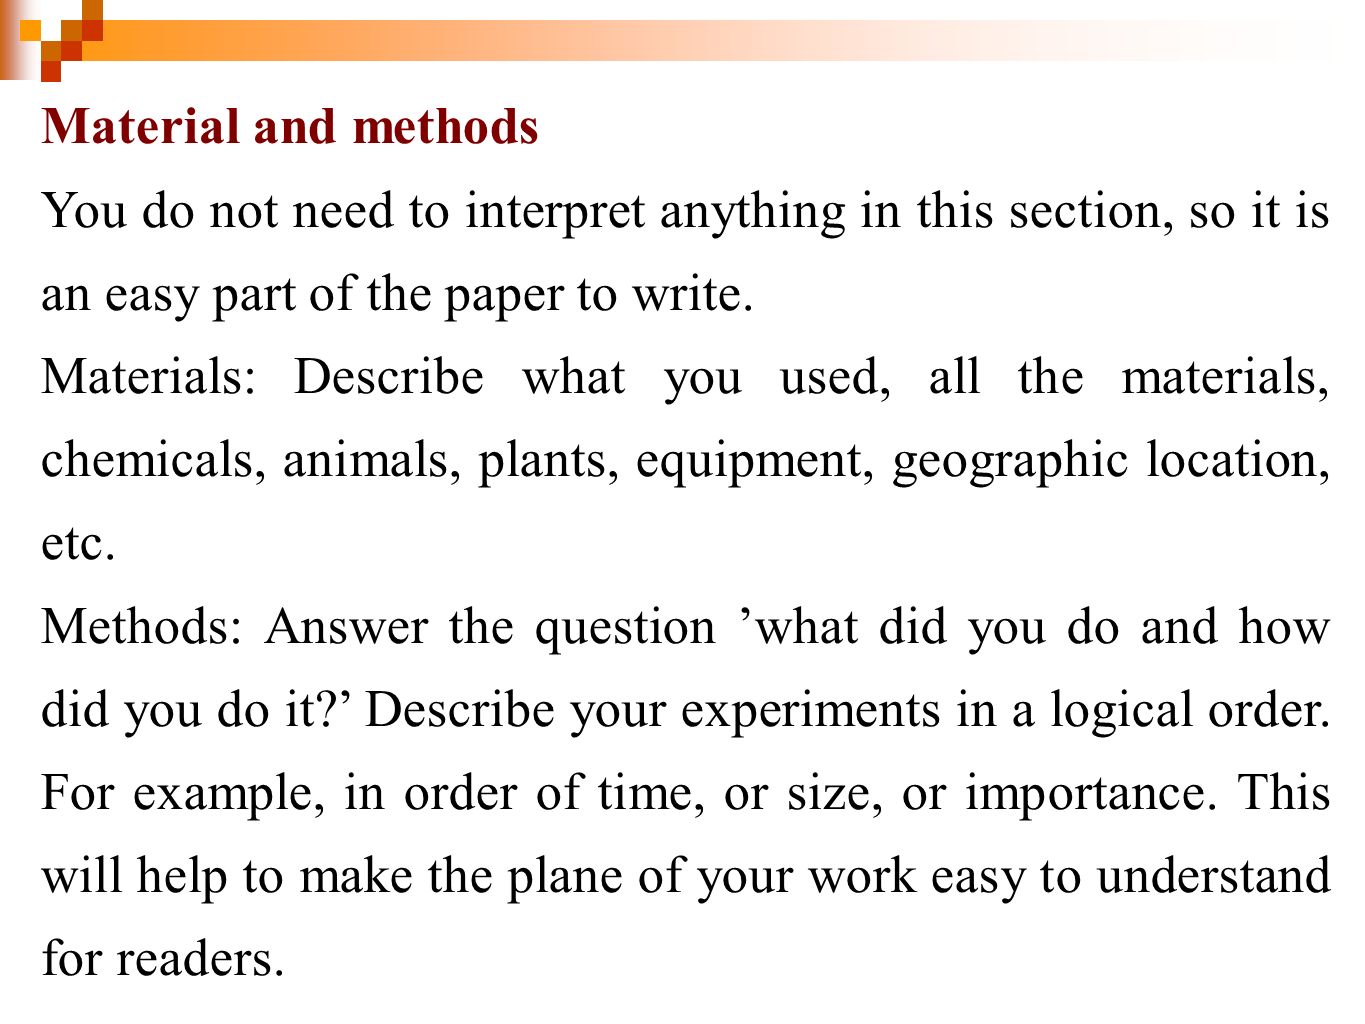 Materials and methods. Material and methods. Materials and methods / methodology. Methods Section. How to write methodology in research paper example.